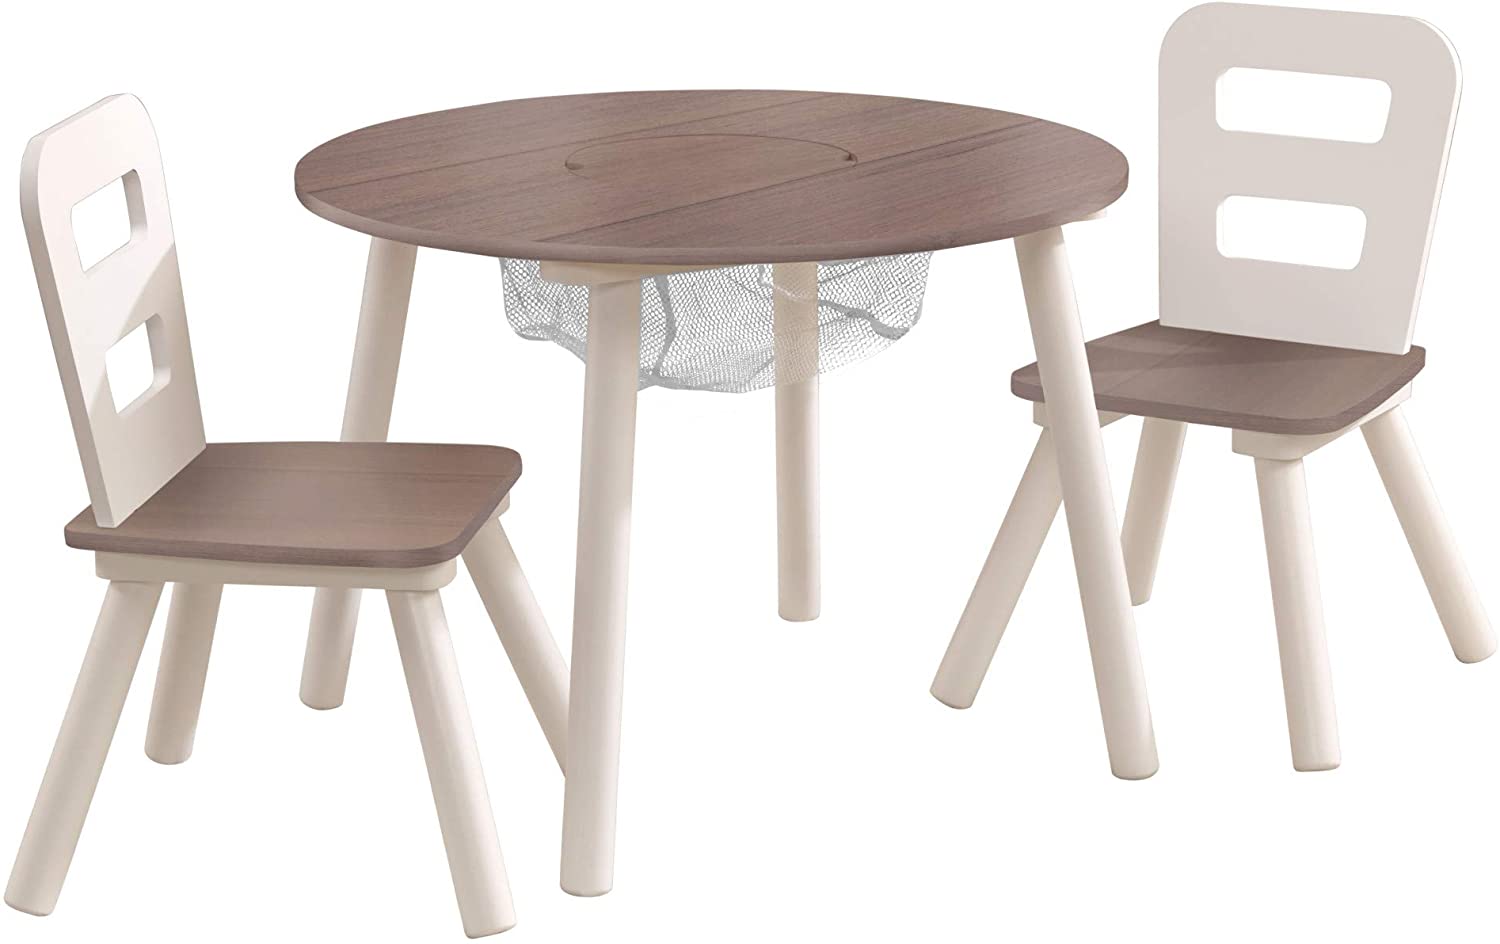 Round Table and 2 Chair Set for children (Grey) Deals499